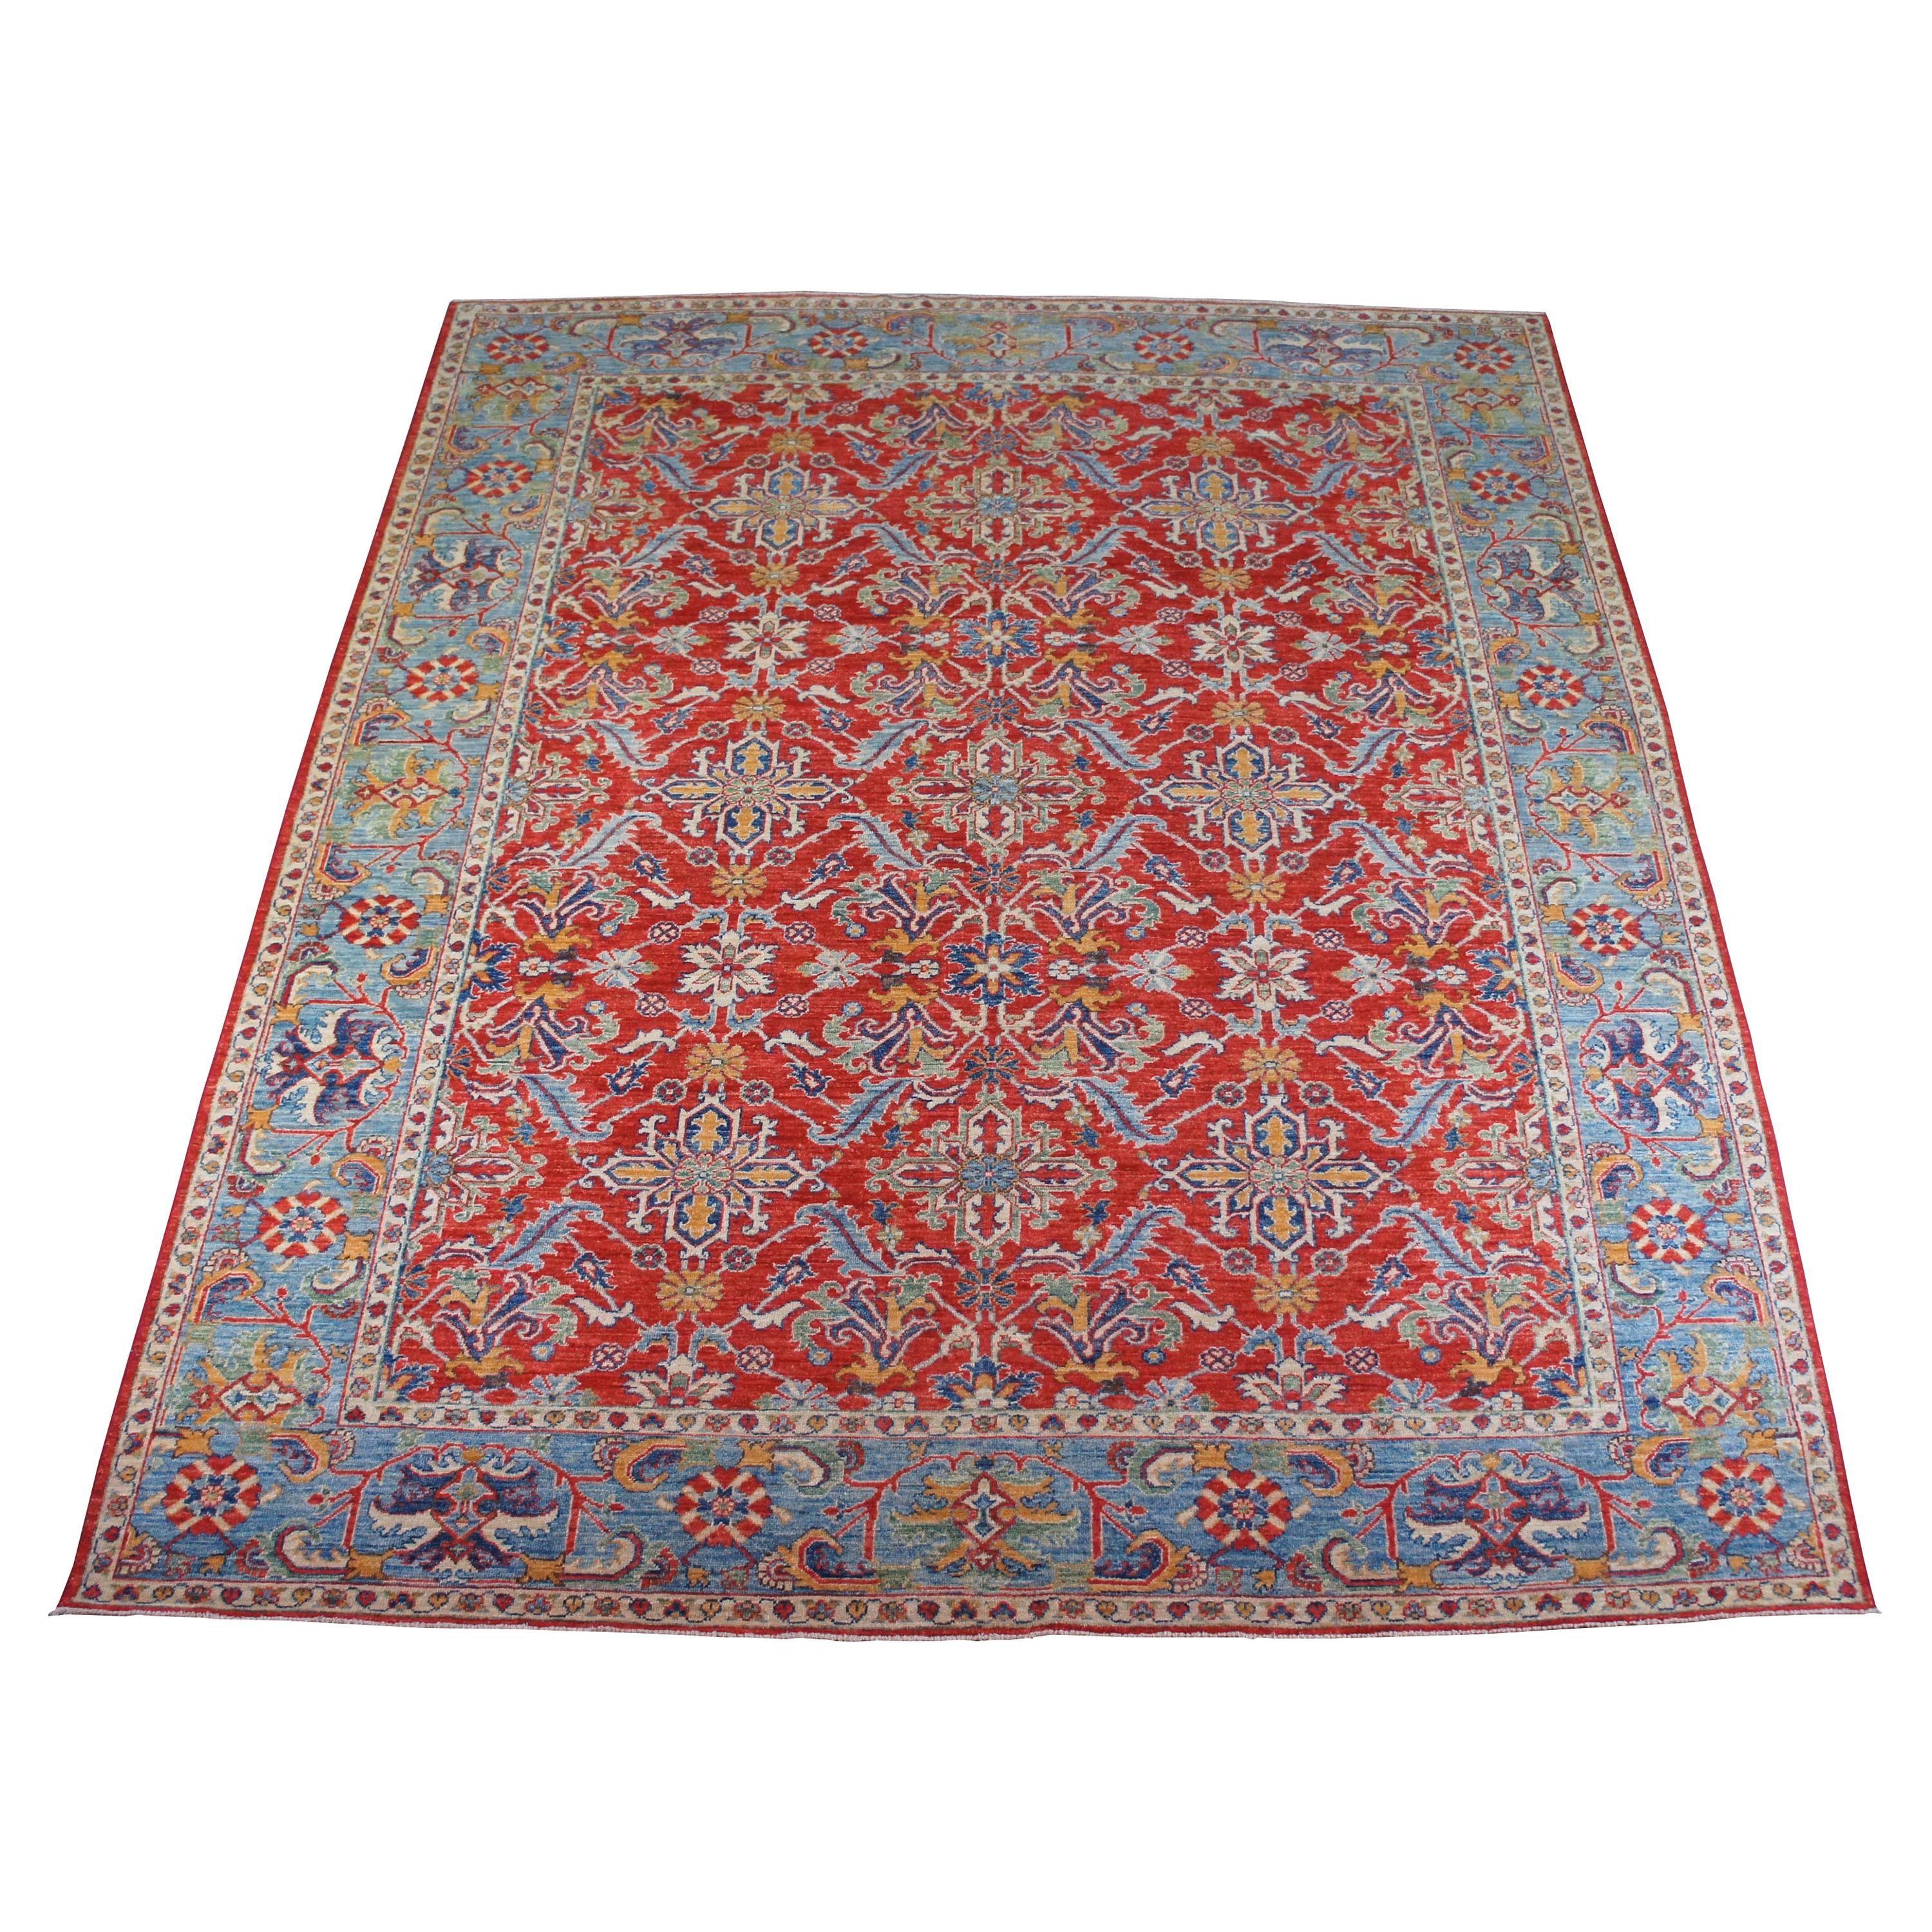 Traditional Pakistan Hand Knotted Wool Floral Area Rug Carpet Red Blue